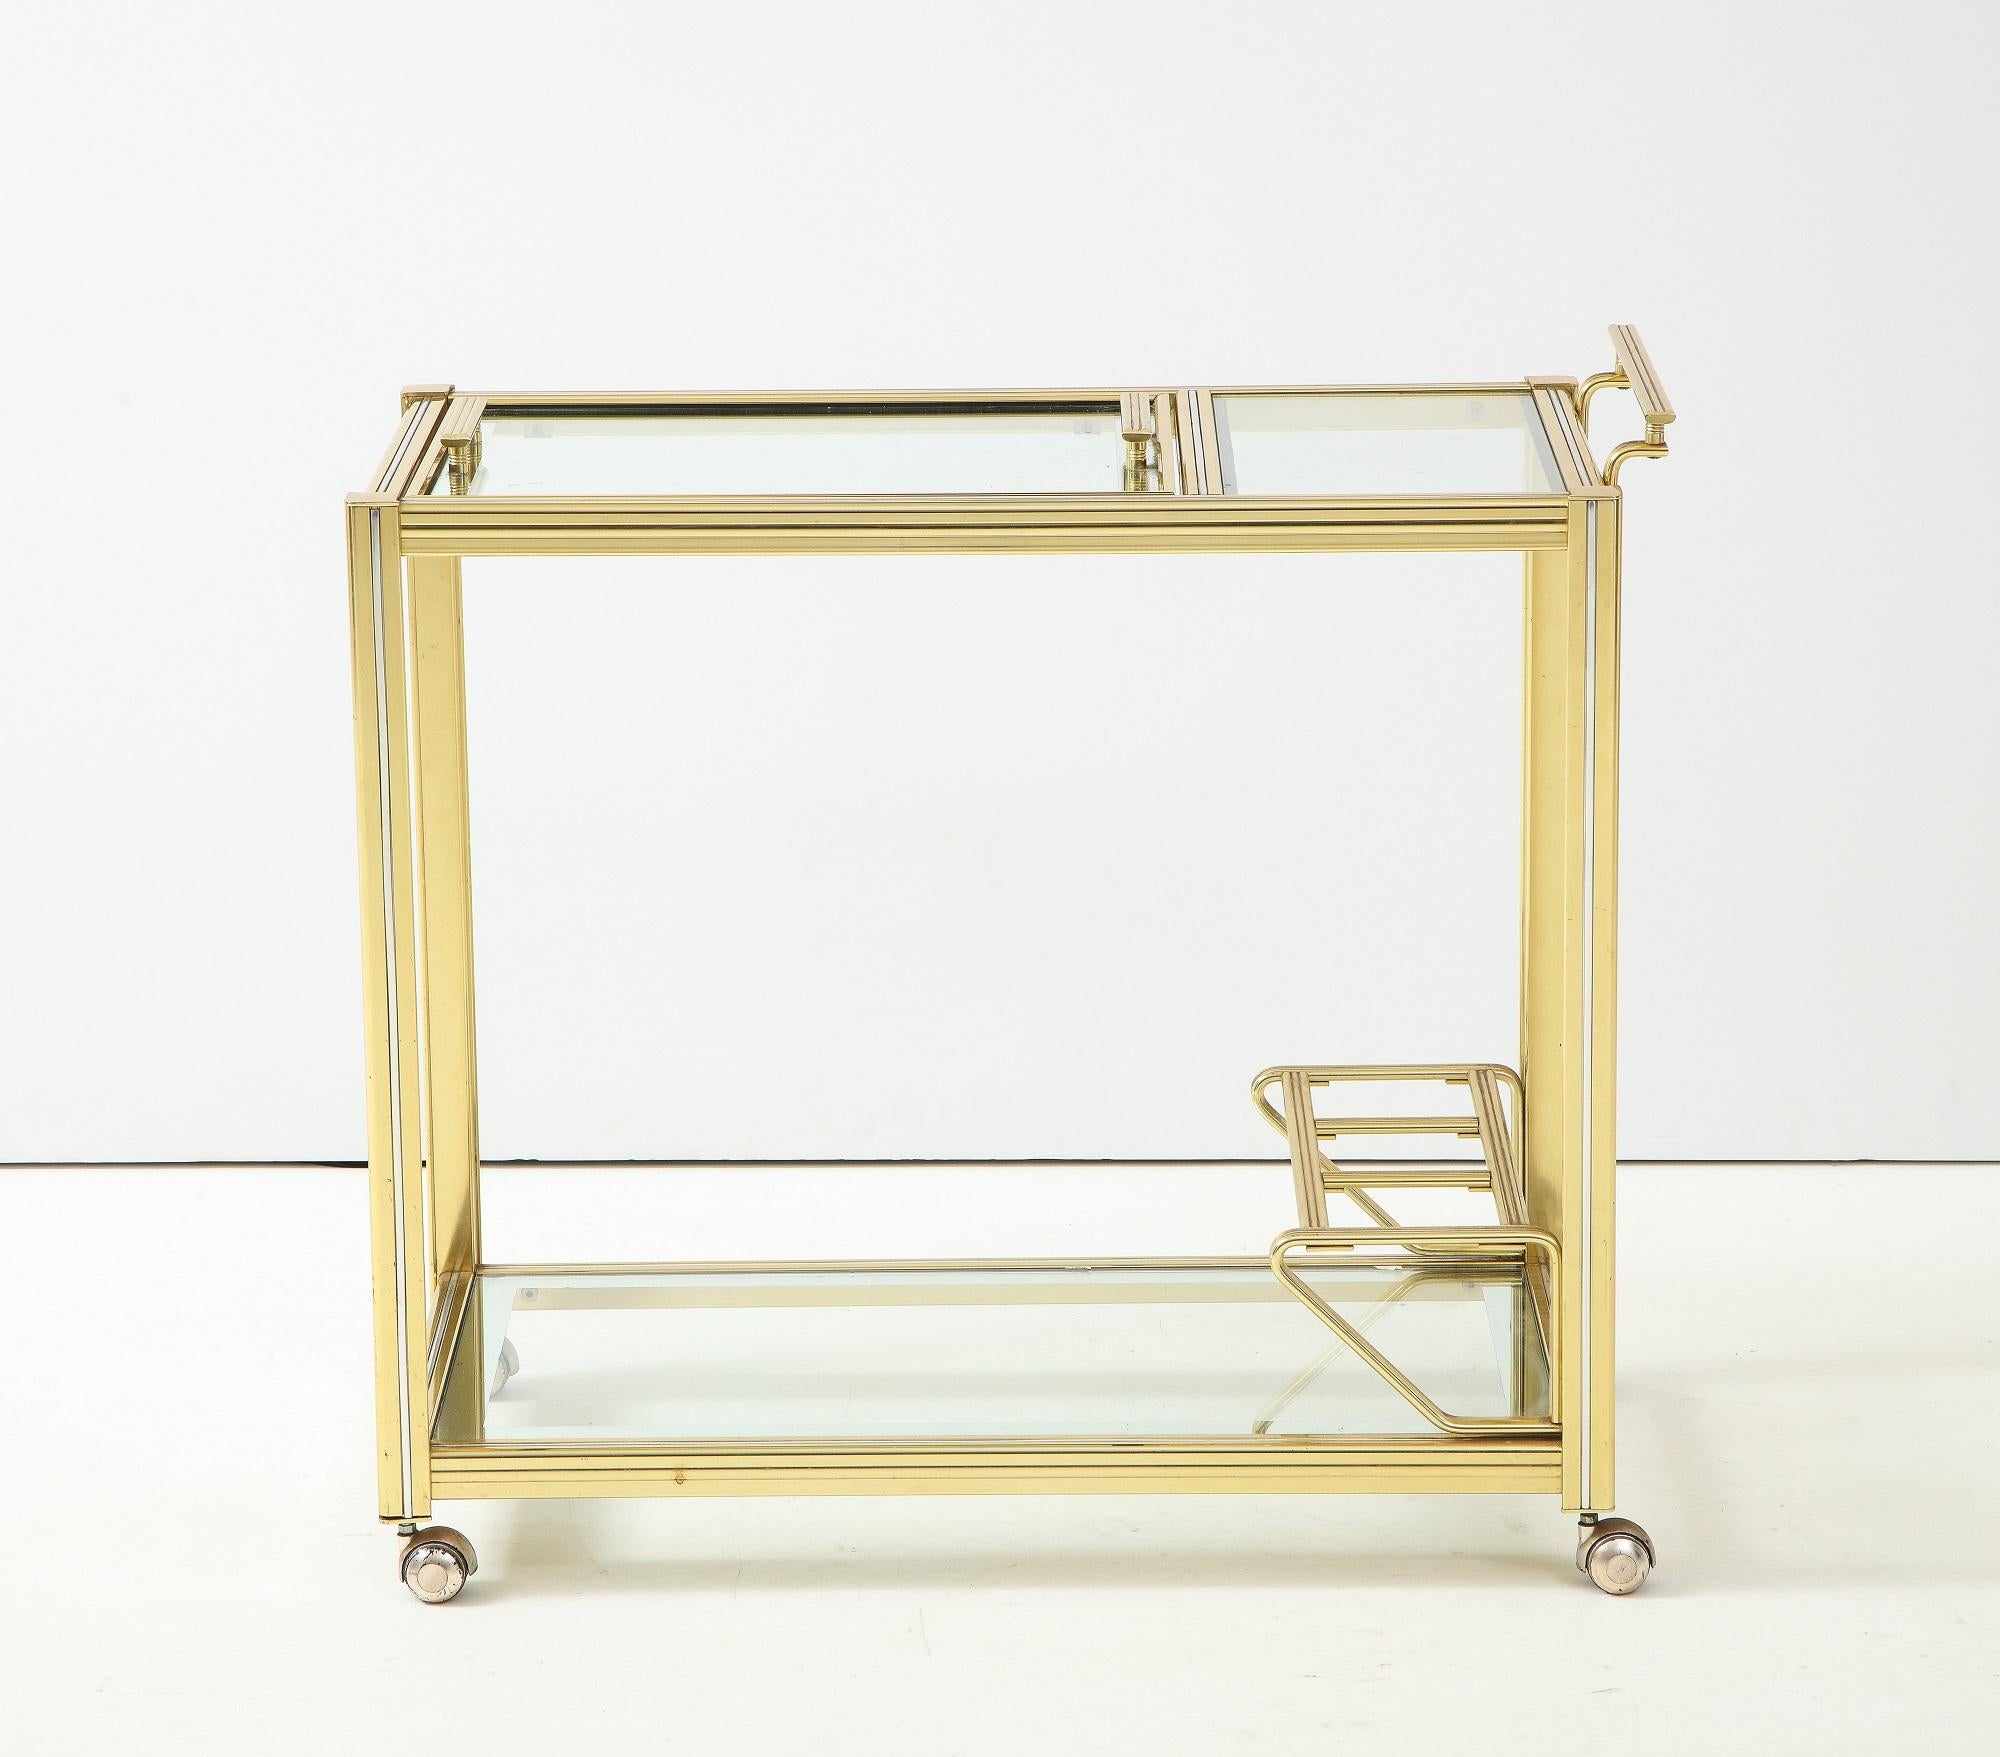 An mid 20th century brass and glass bar cart or trolley from France. The top shelf has a lift-out tray with handles, making this a unique and special cart. Perfect for entertaining, the lower shelf hase a three bottle holder. Four working casters.